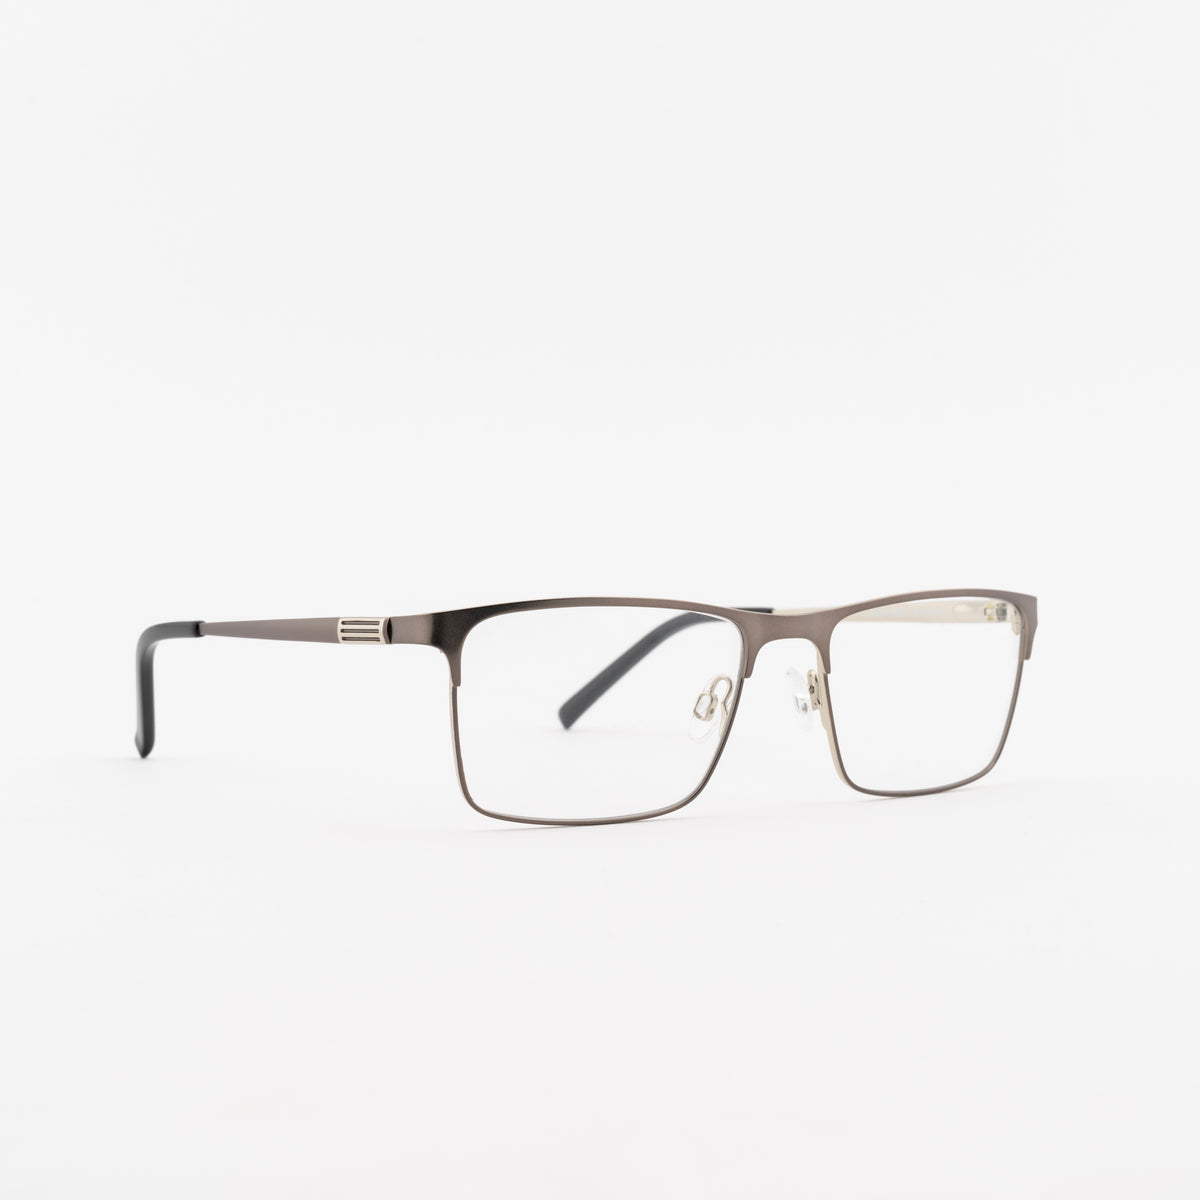 Superflex SF-554 Frames Superflex 55 M103 - CHARCOAL SILVER Not Available